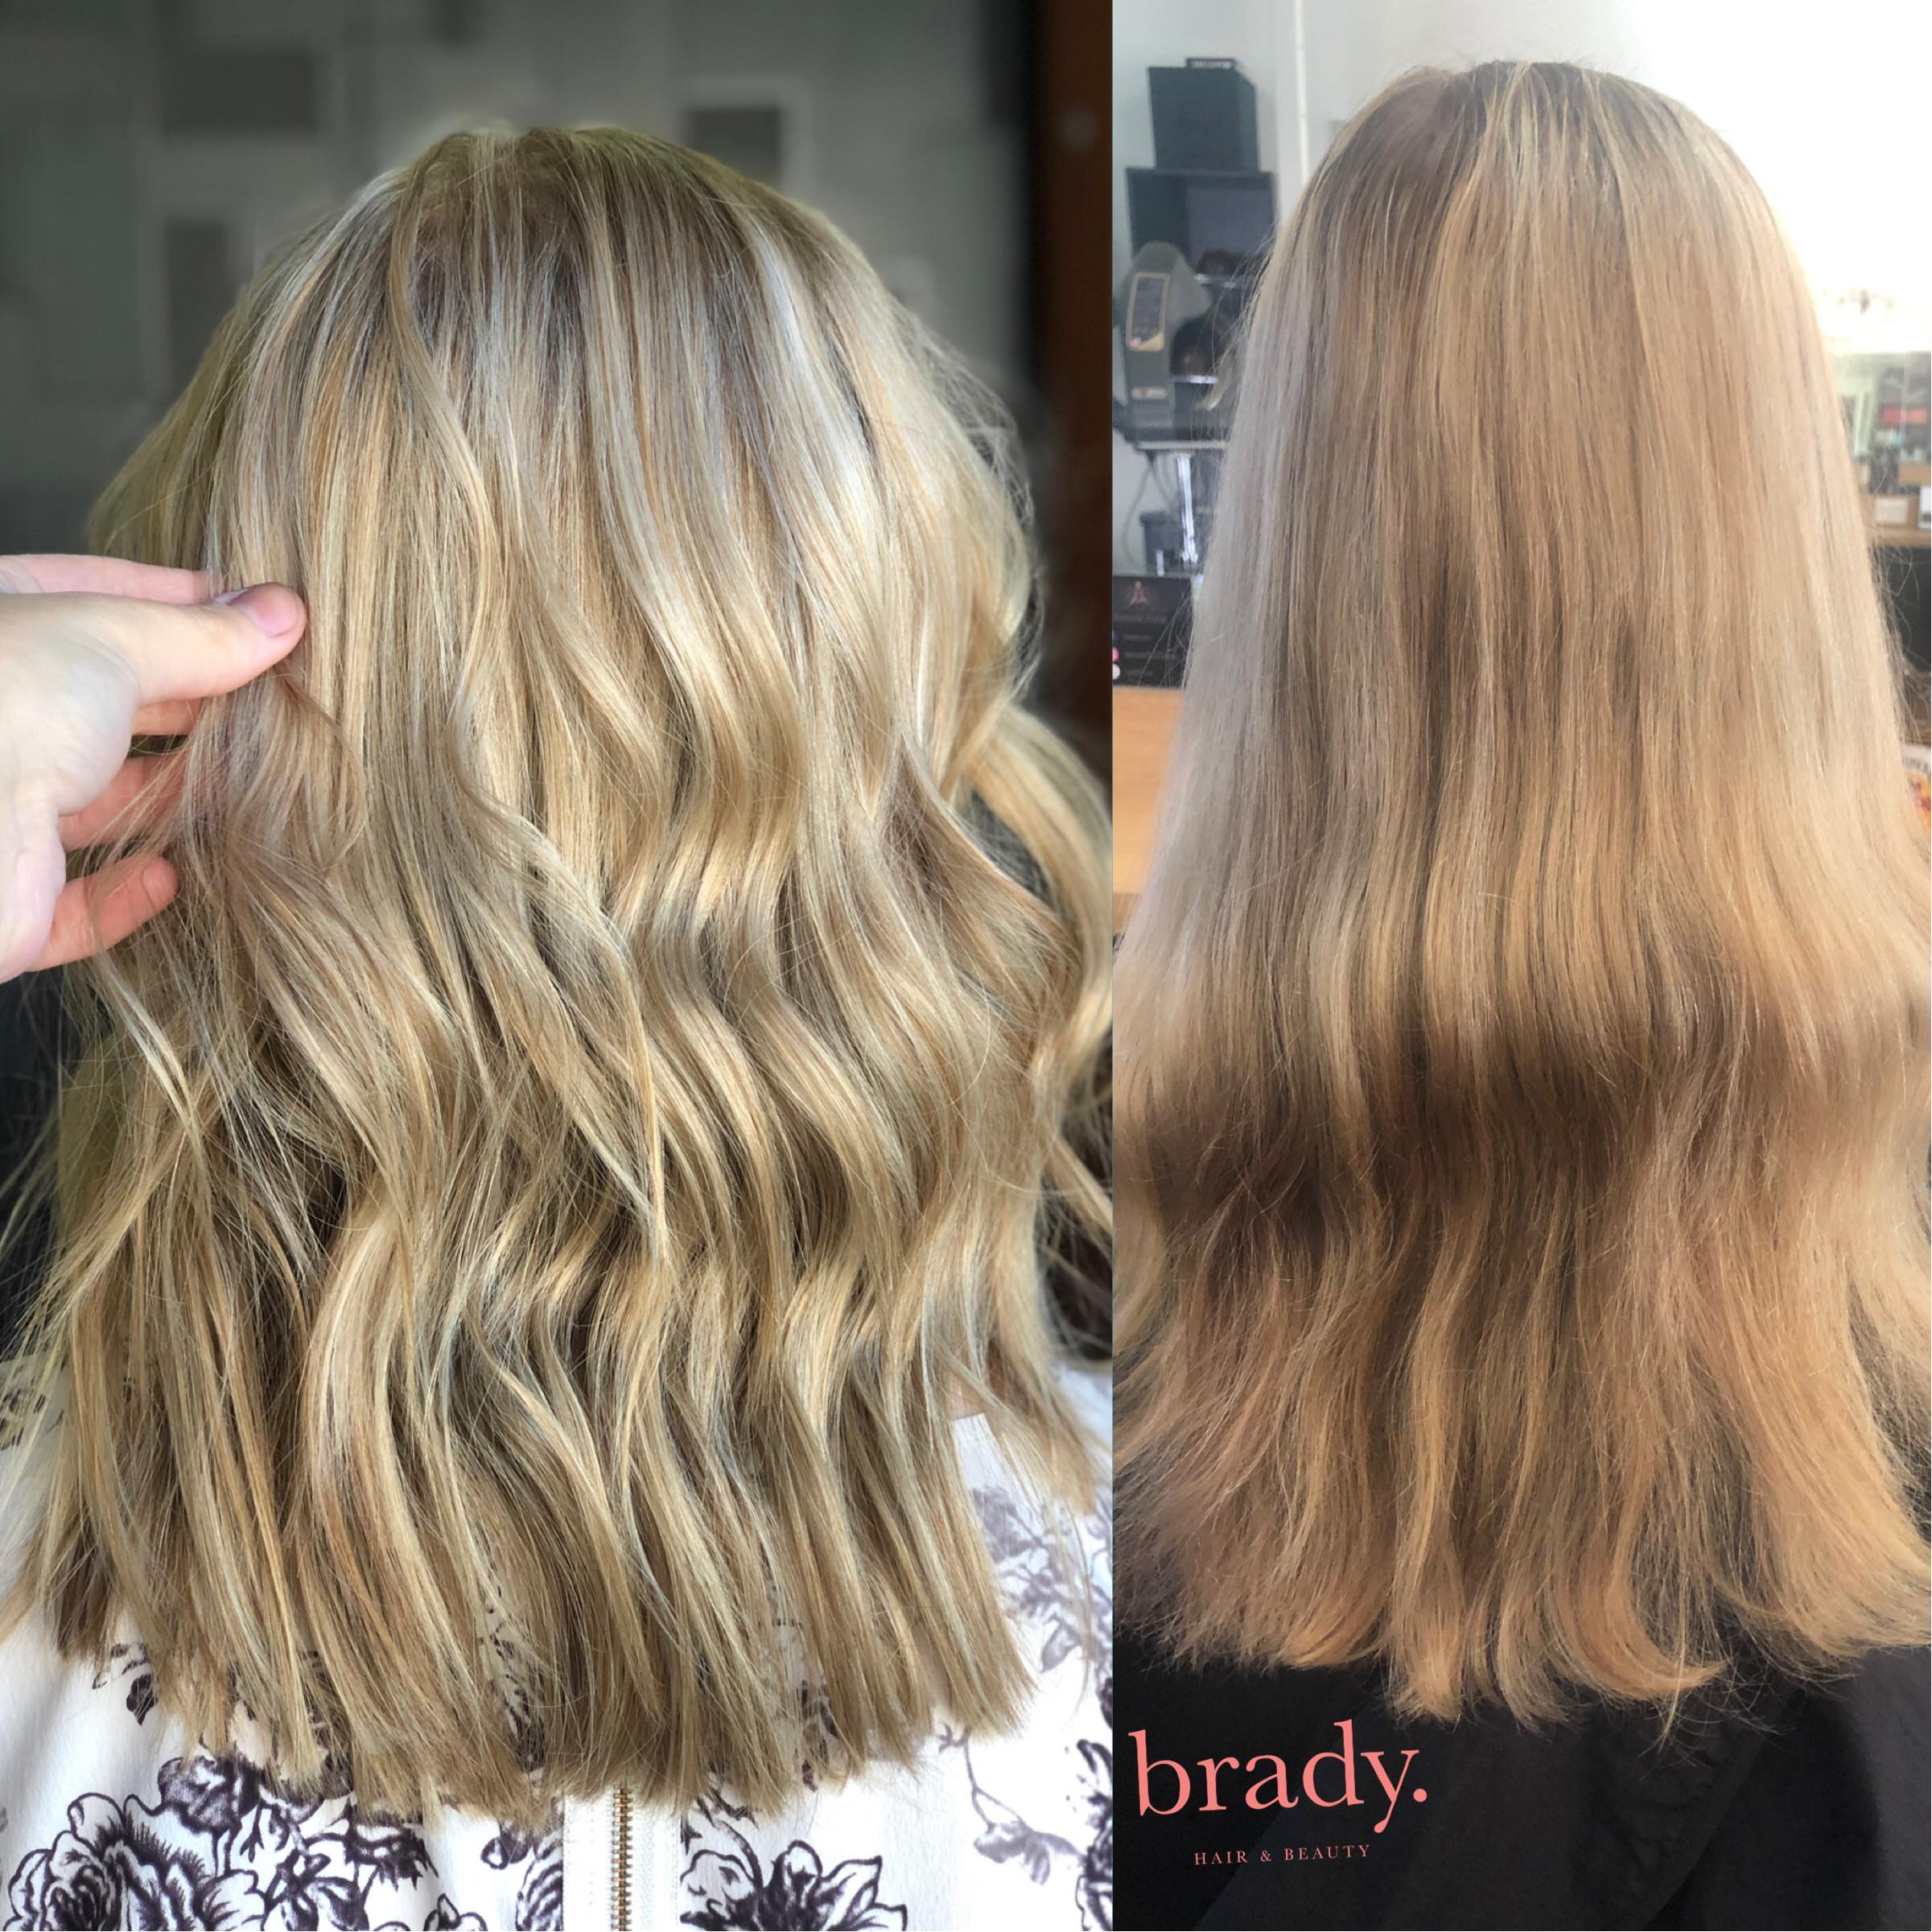  Before and after photo of woman with long medium ash blonde hair. Styled by Brady. Hair &amp; Beauty, Toowong, Brisbane. 